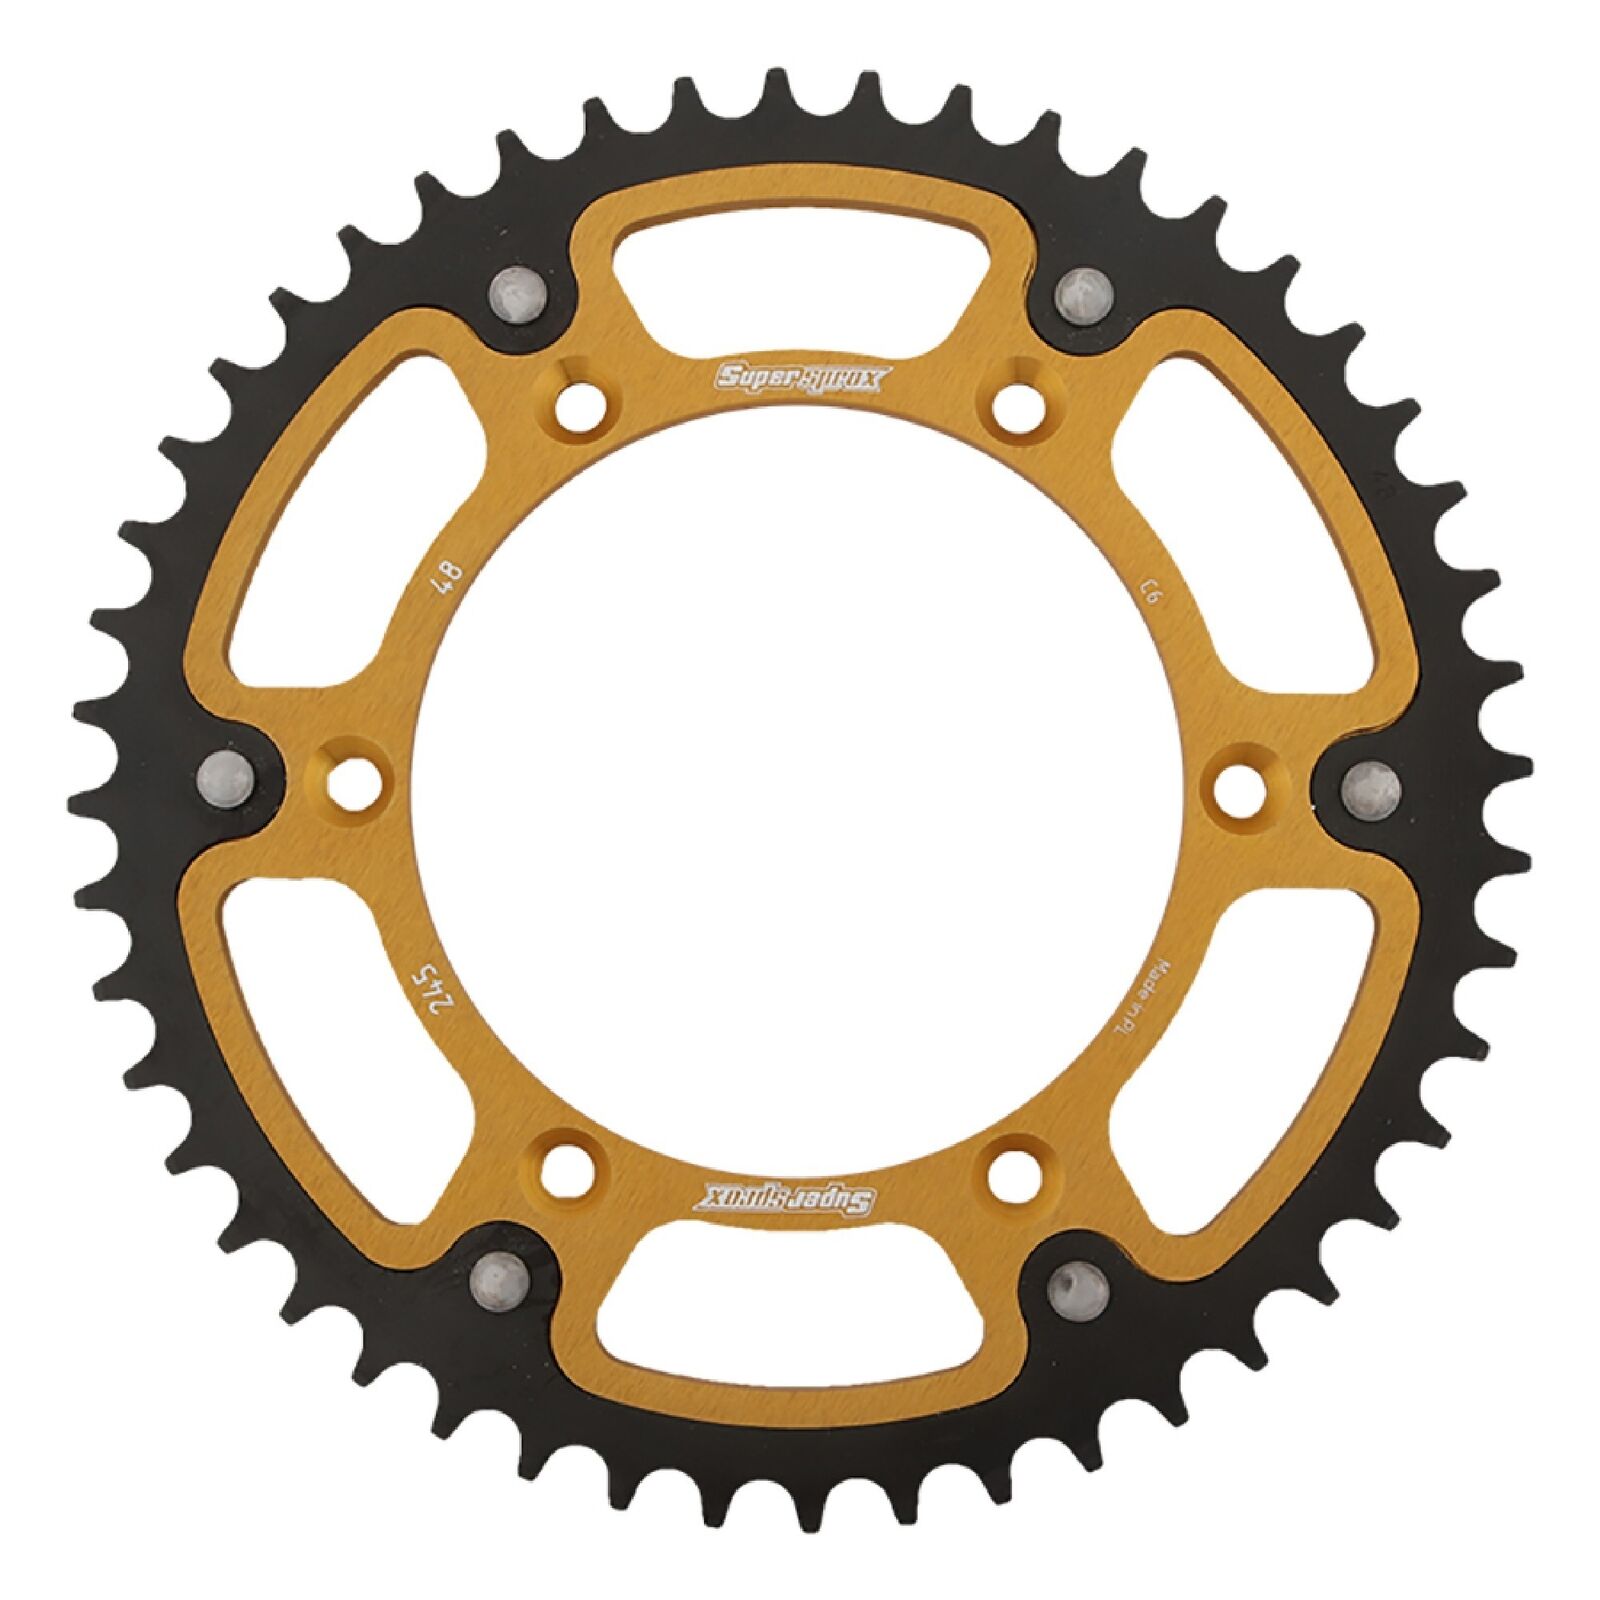 New Supersprox Stealth Sprocket 48T for Yamaha WR250R DUAL Sport 08-17 Gold